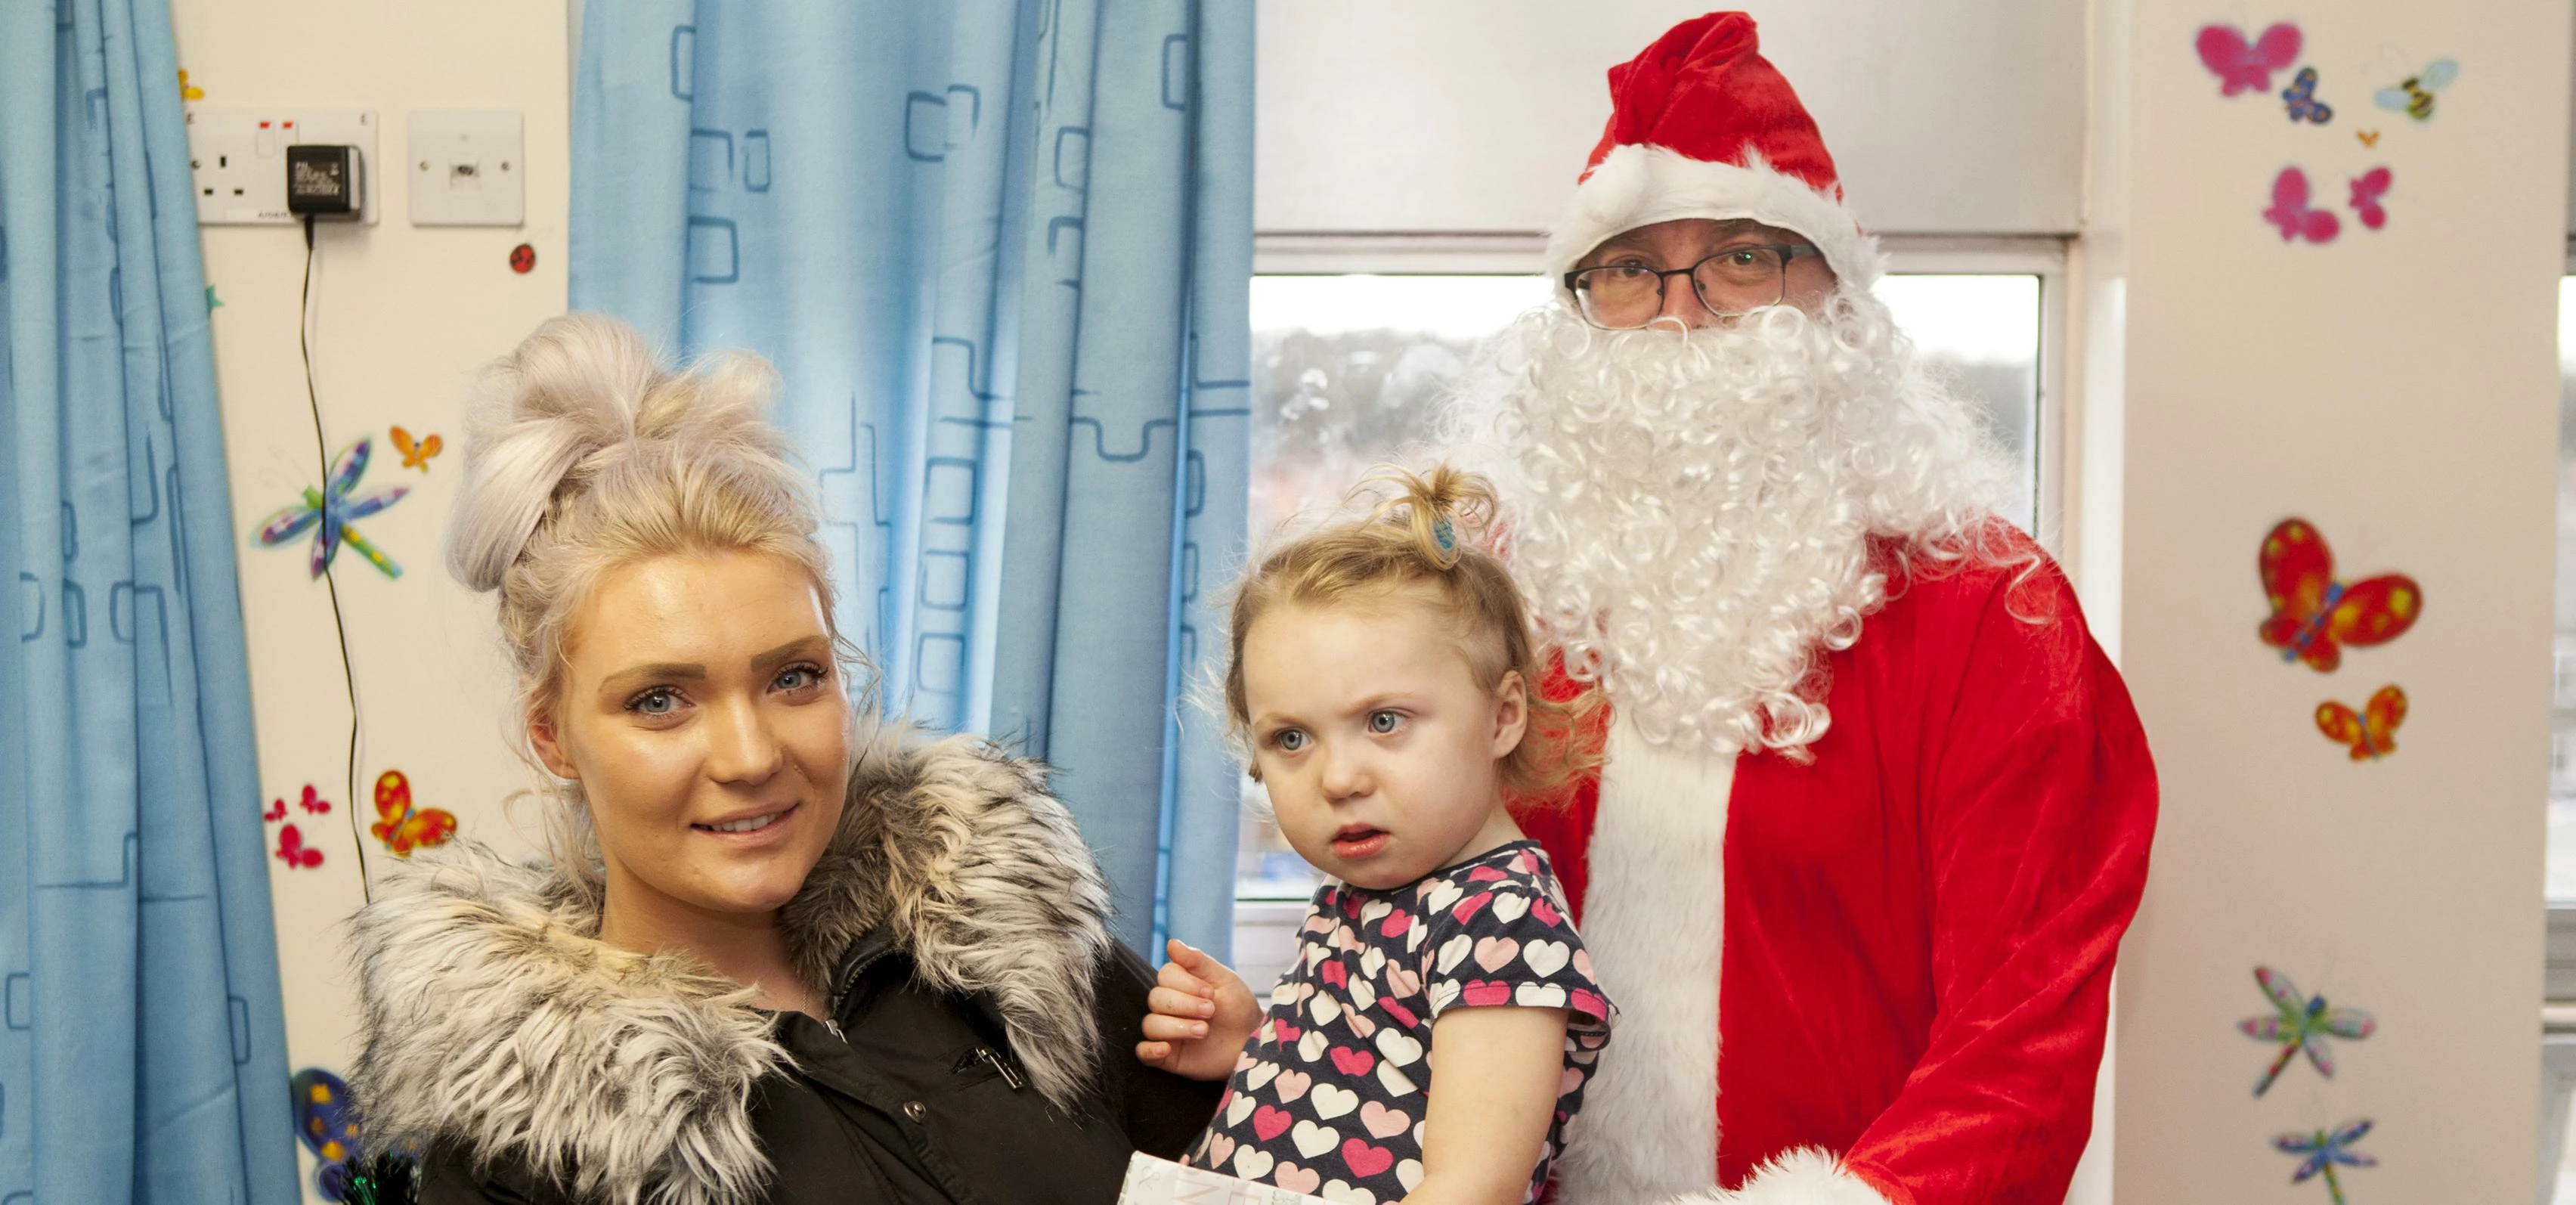 Stephen Haram (Santa) giving a present to 2 year old to Cienna Emmerson with Mother Chloe Bradford f